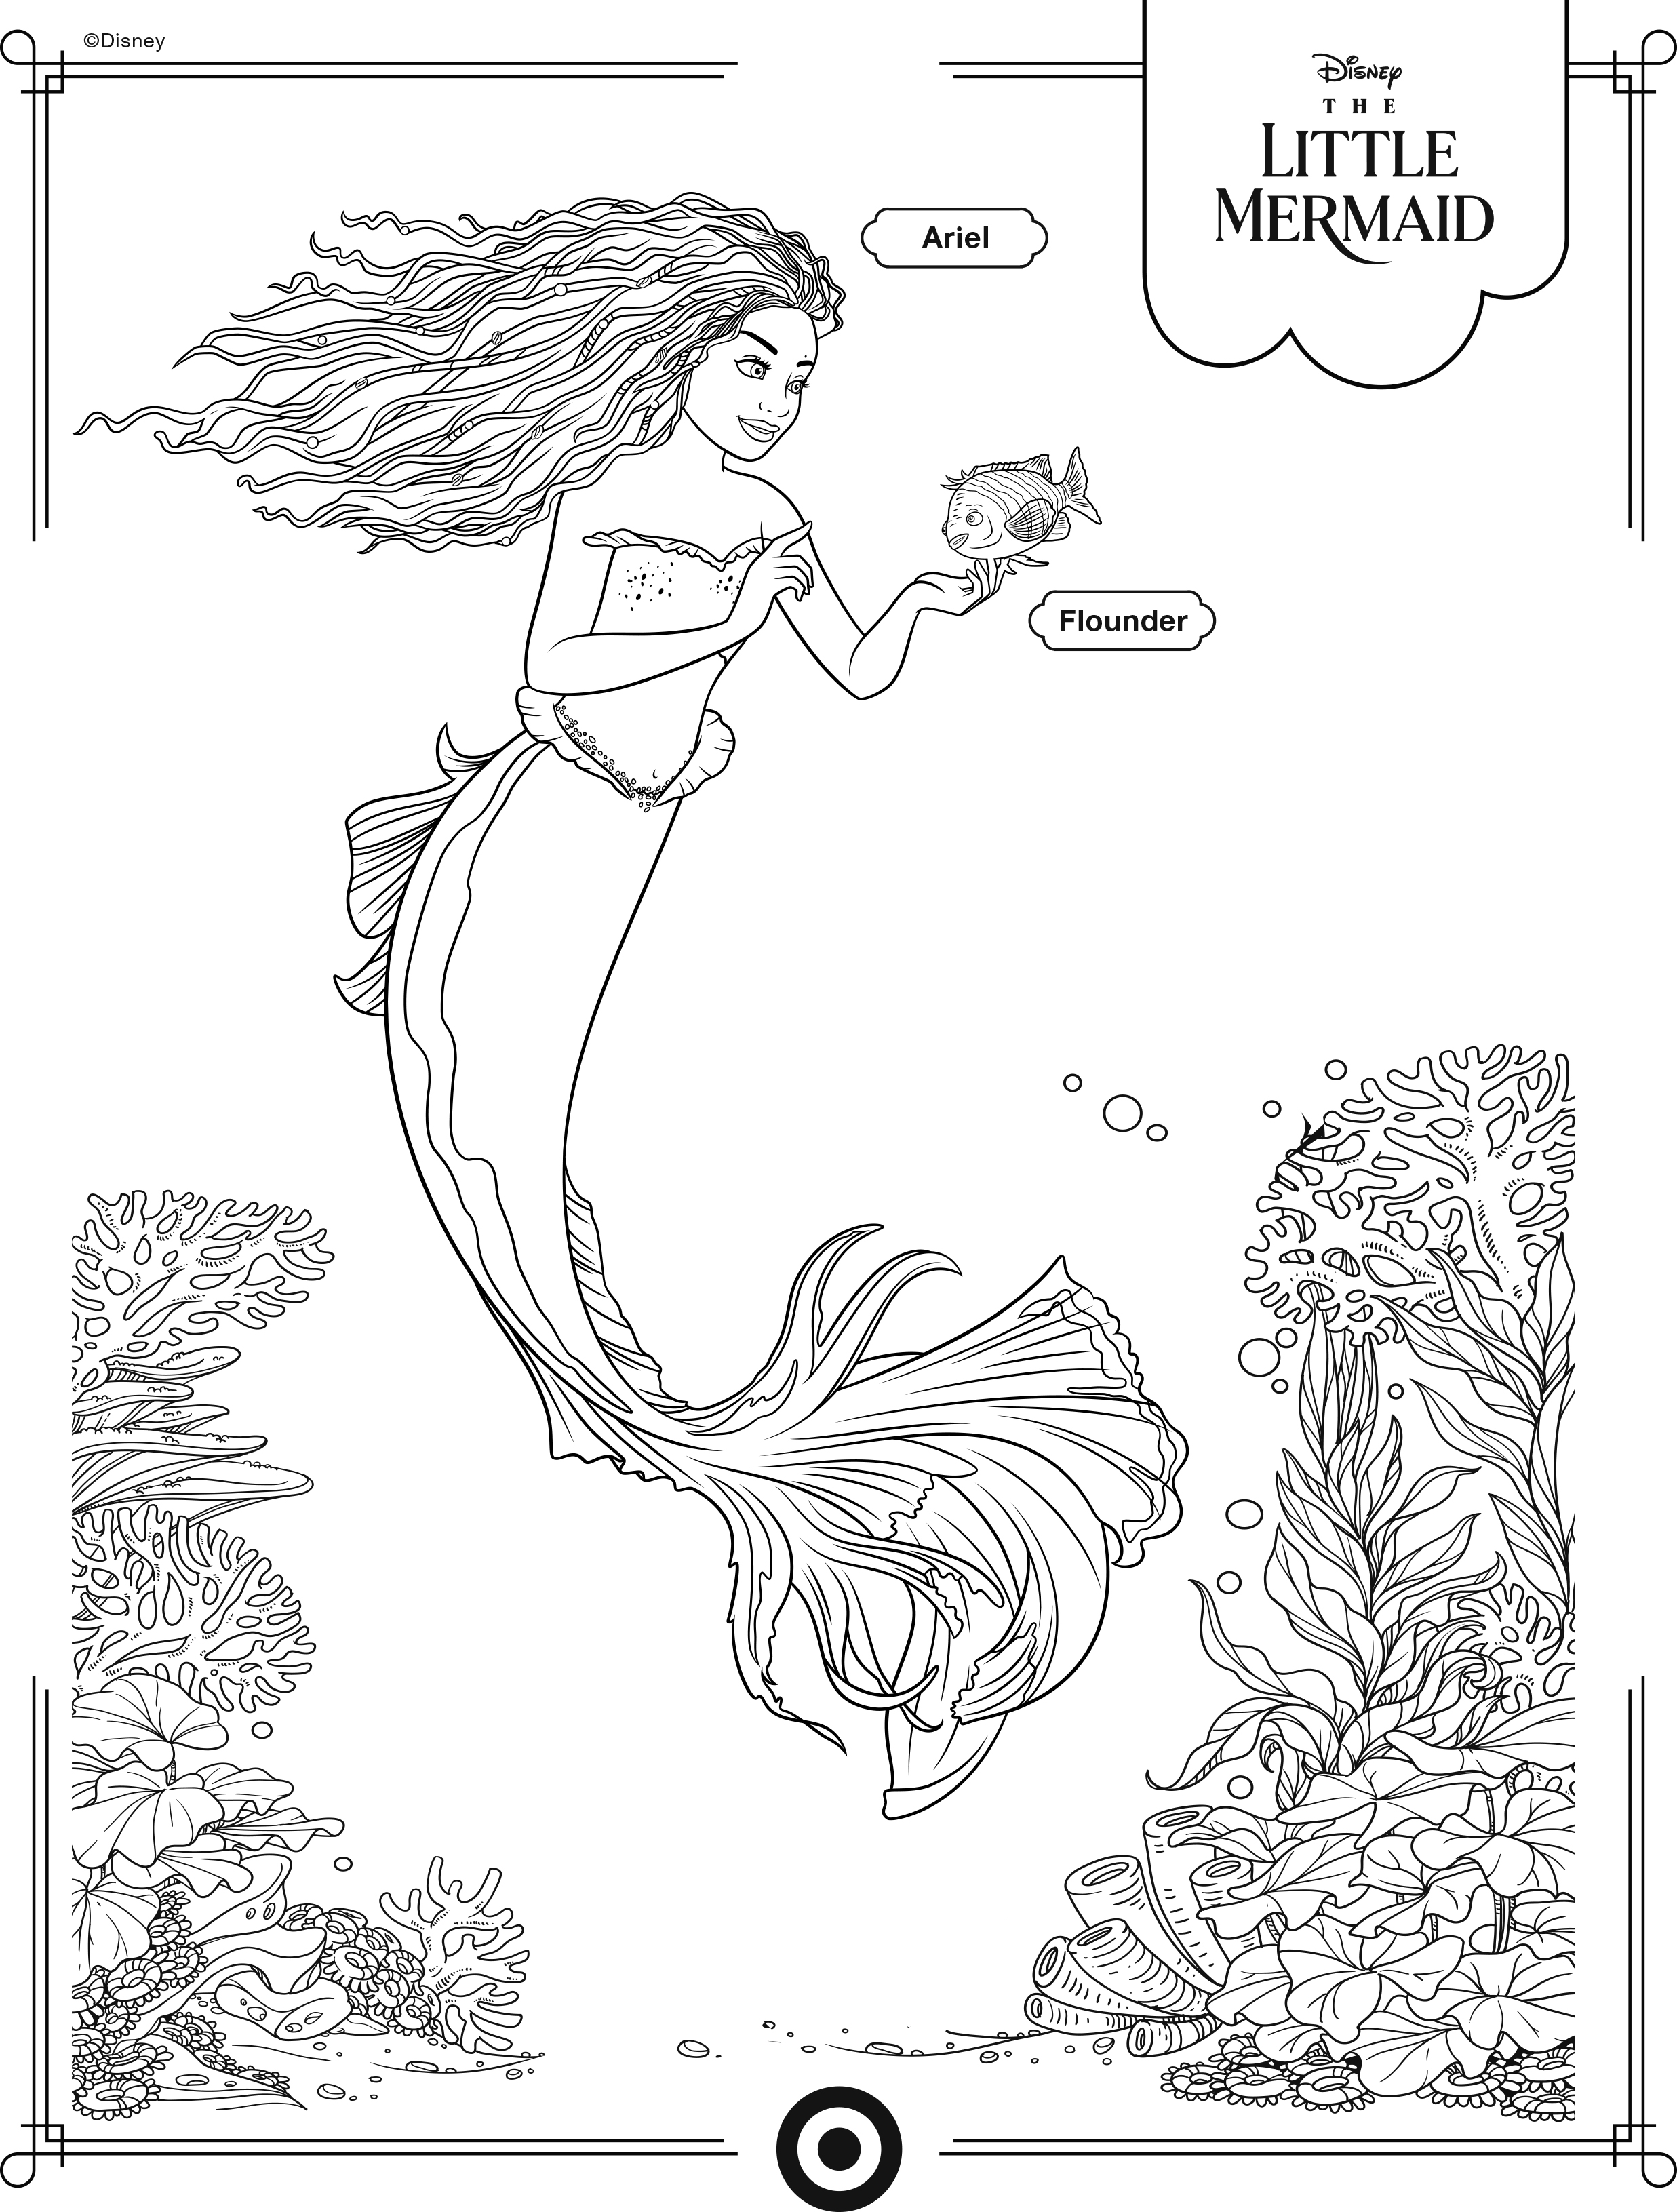 The little mermaid live action movie coloring pages with ariel halle bailey